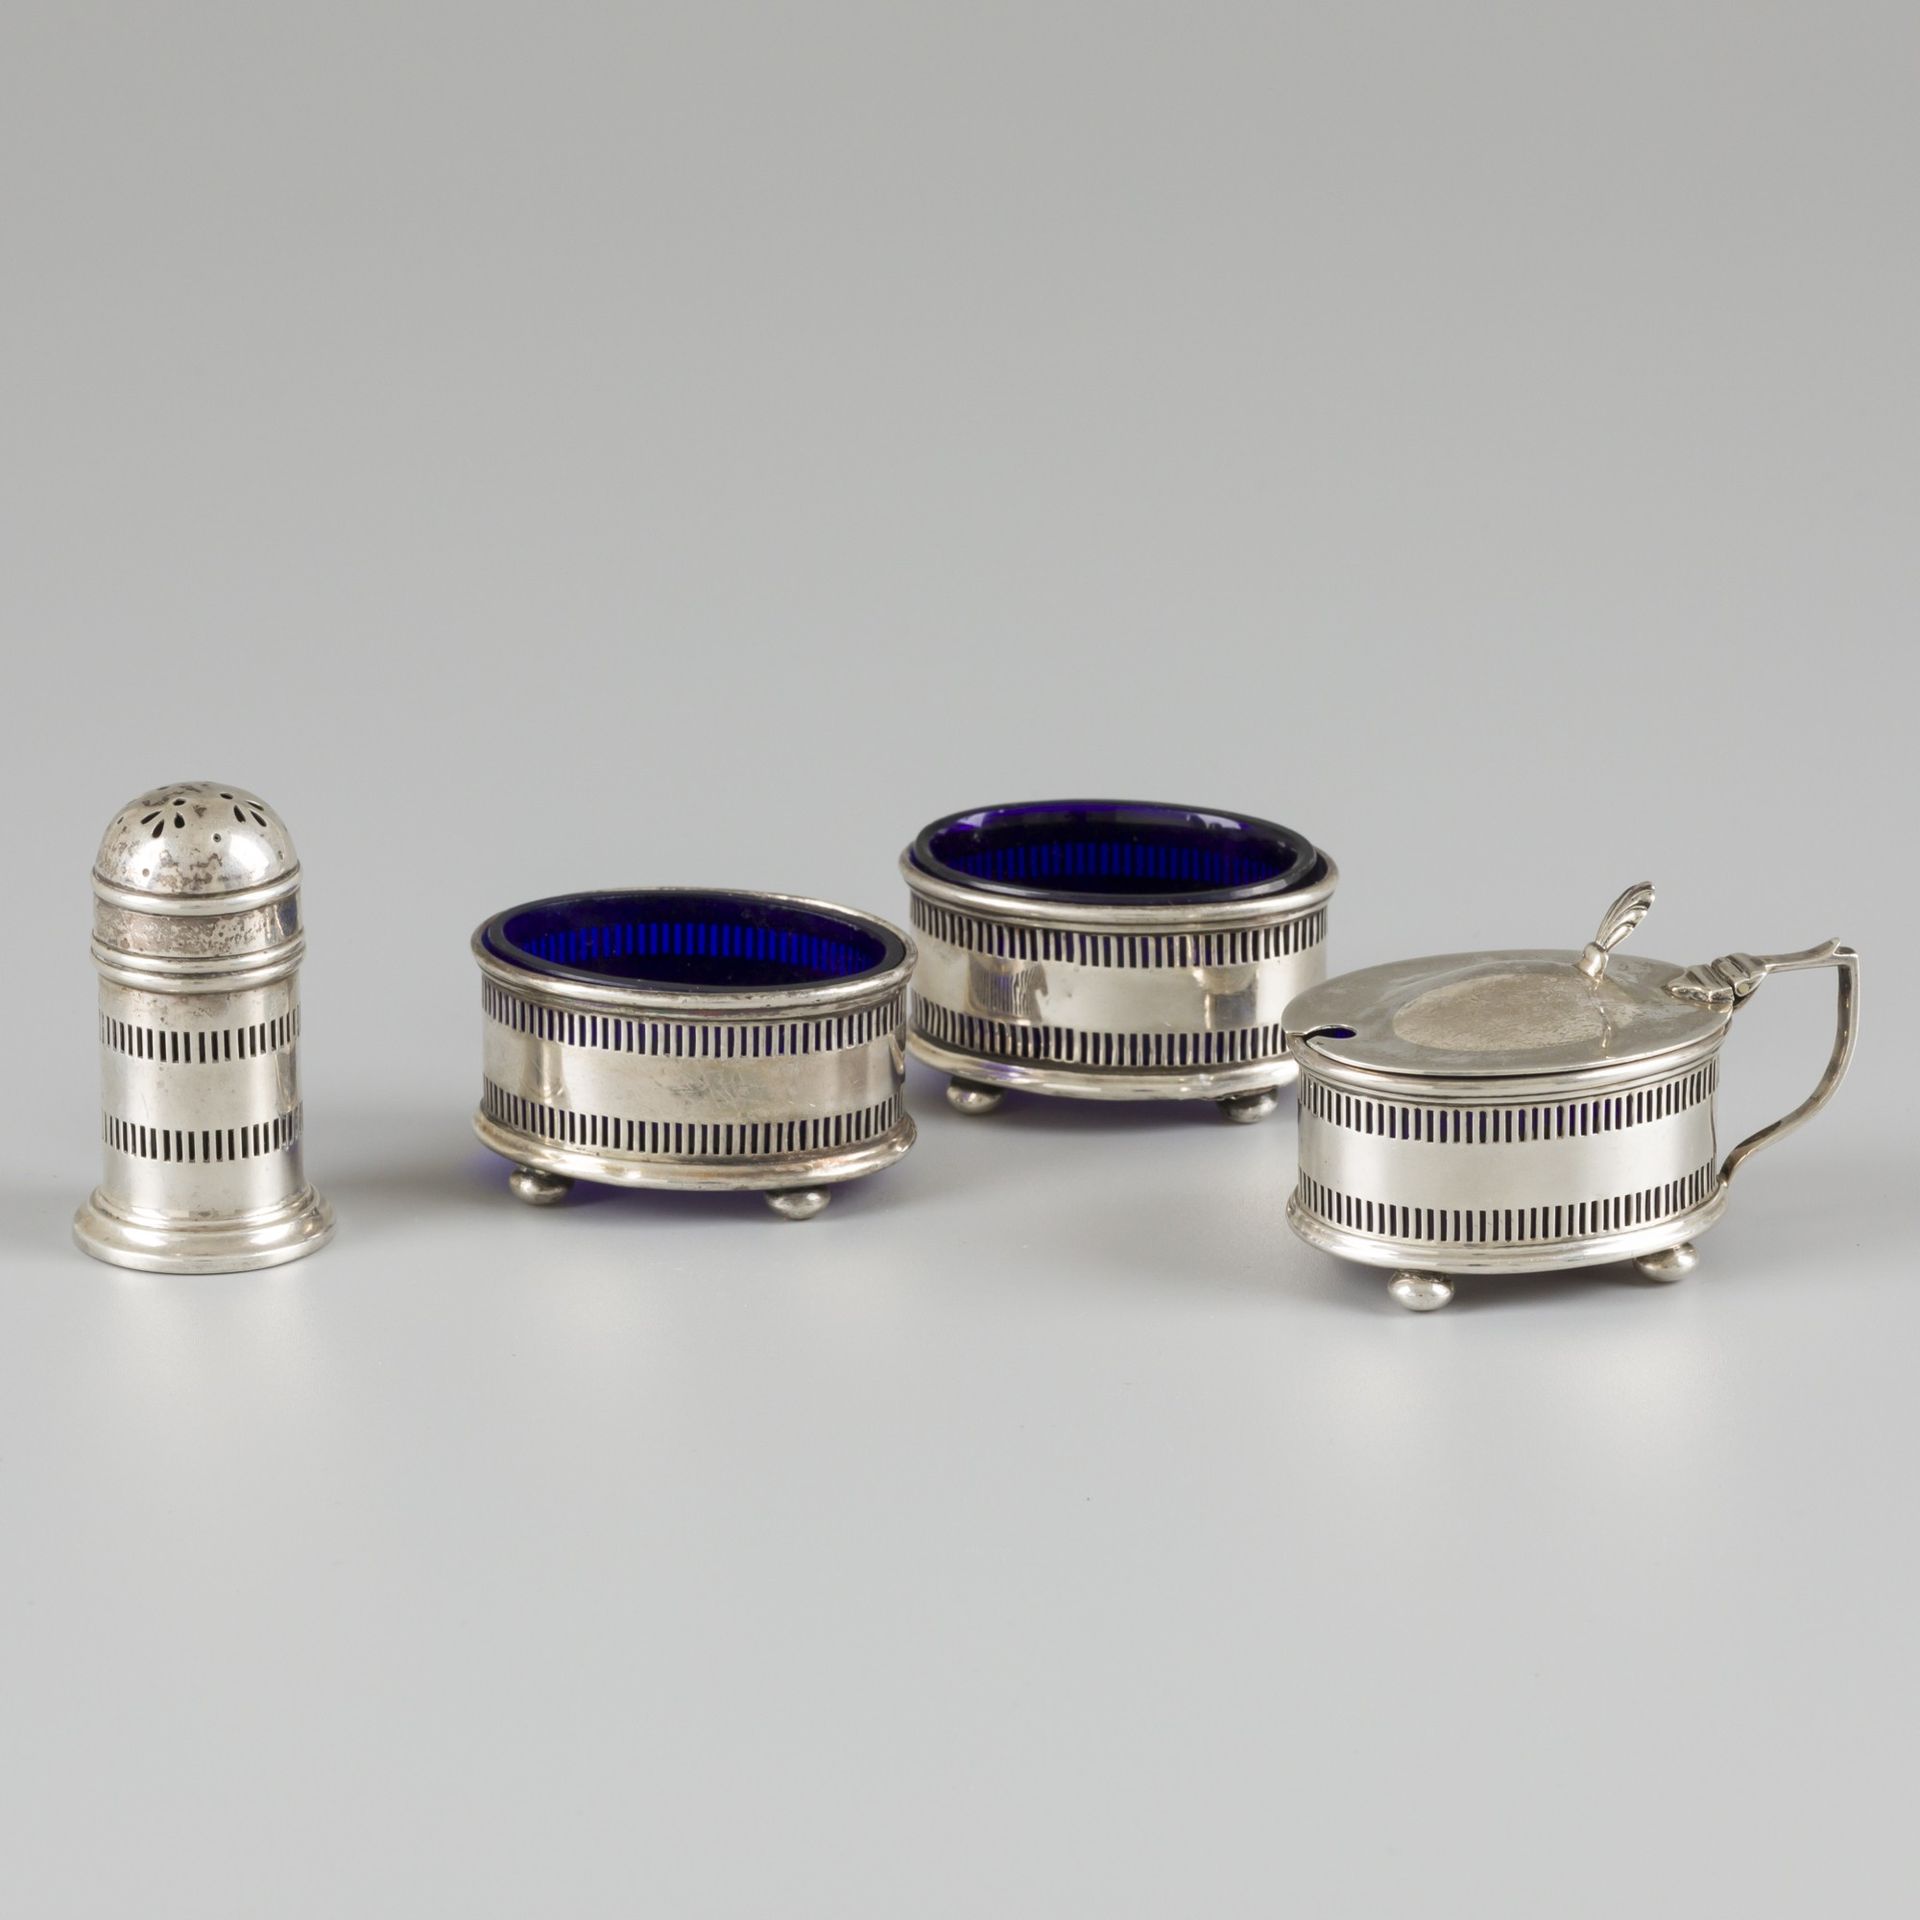 4-piece set of salt cellars, mustard pot and sifter silver. 由2个盐罐，1个芥末罐和1个筛子组成，都&hellip;